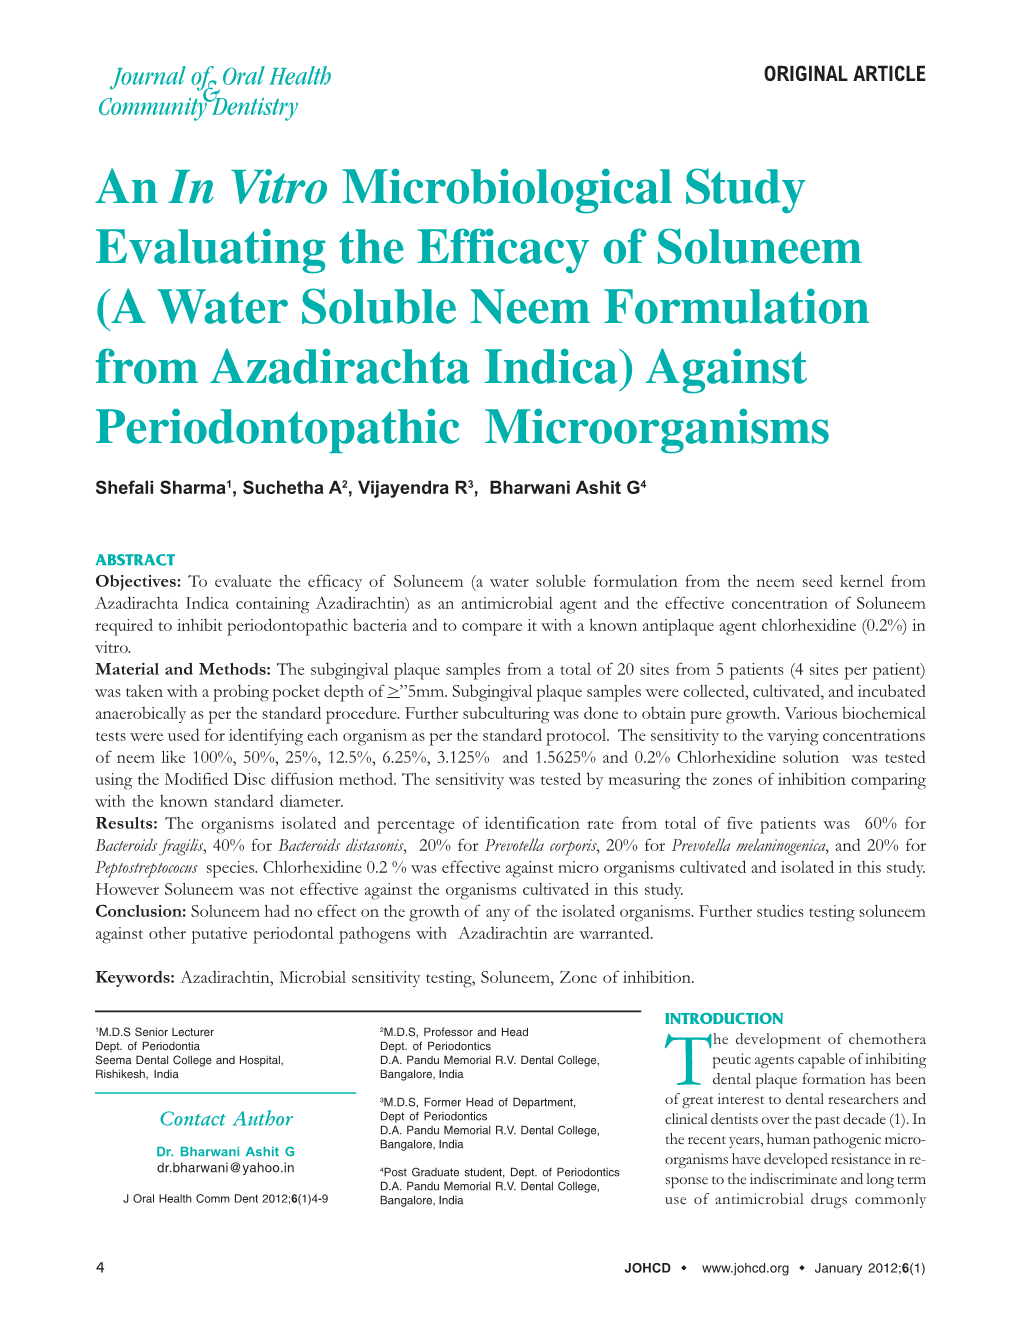 (A Water Soluble Neem Formulation from Azadirachta Indica) Against Periodontopathic Microorganisms